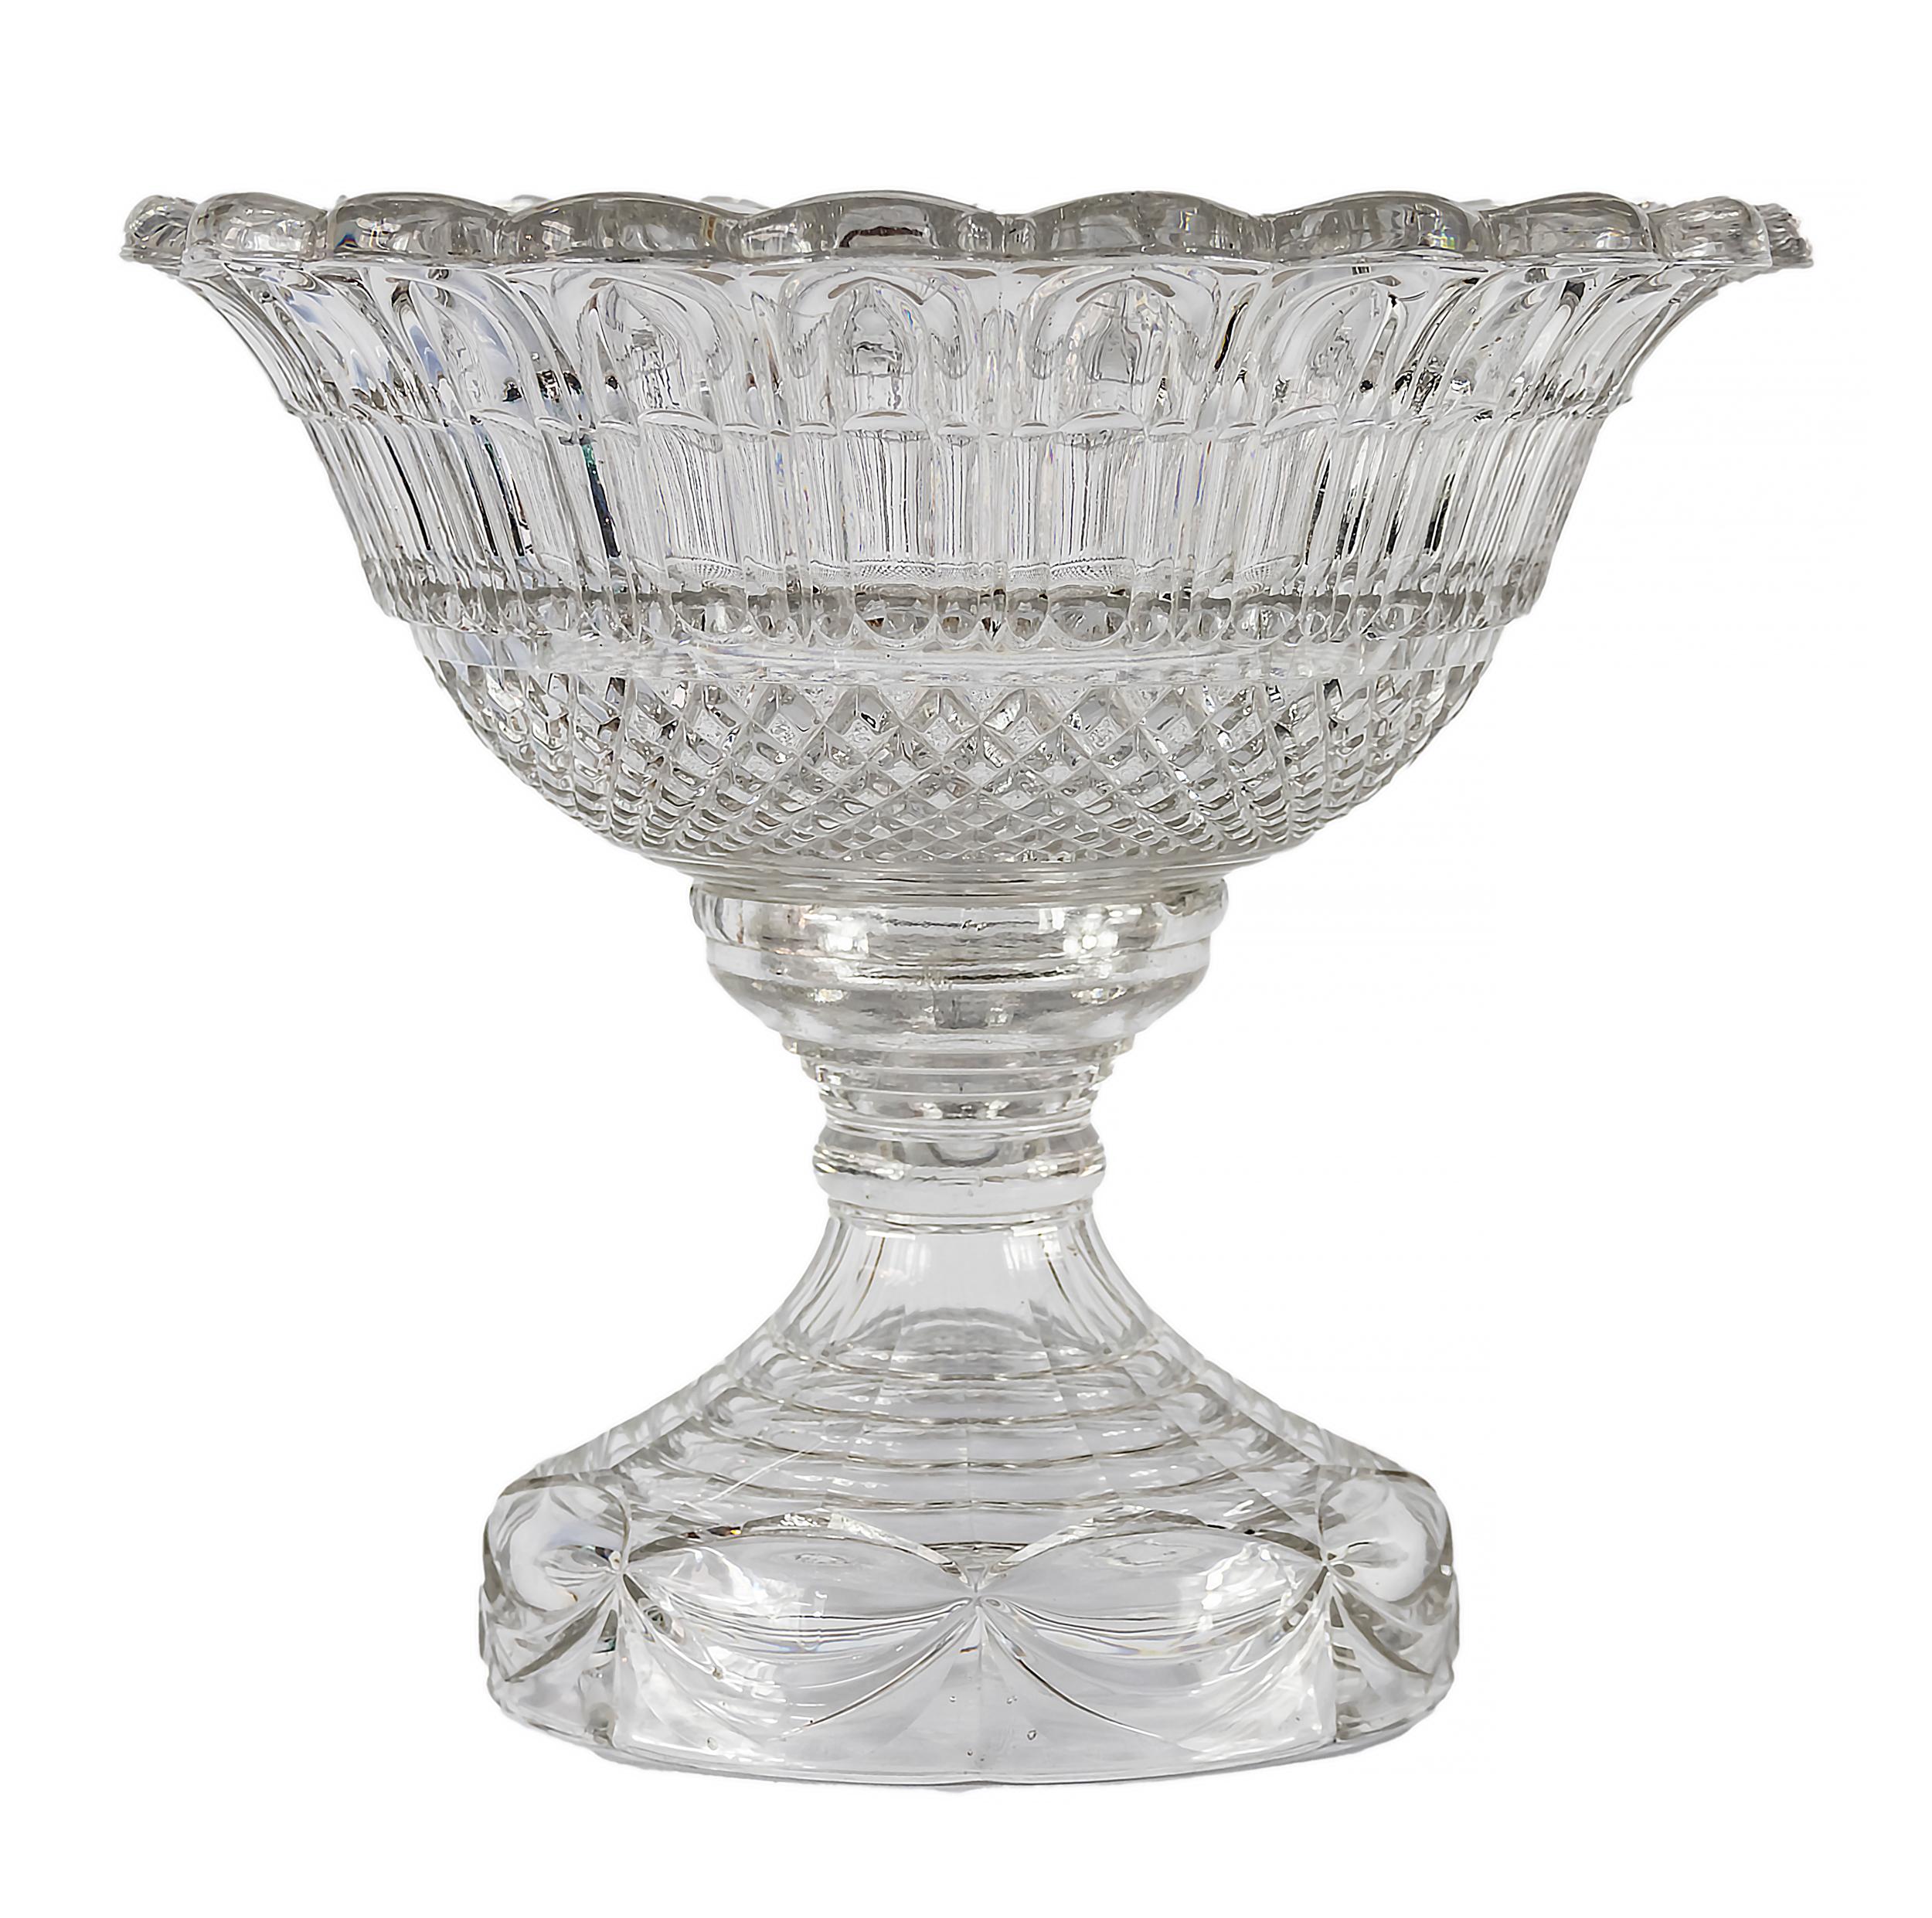 Extra large French crystal vase/centerpiece/punch bowl on pedestal base from 1920-30's. 
The item separates in two pieces.
The total weight: 23 kg.